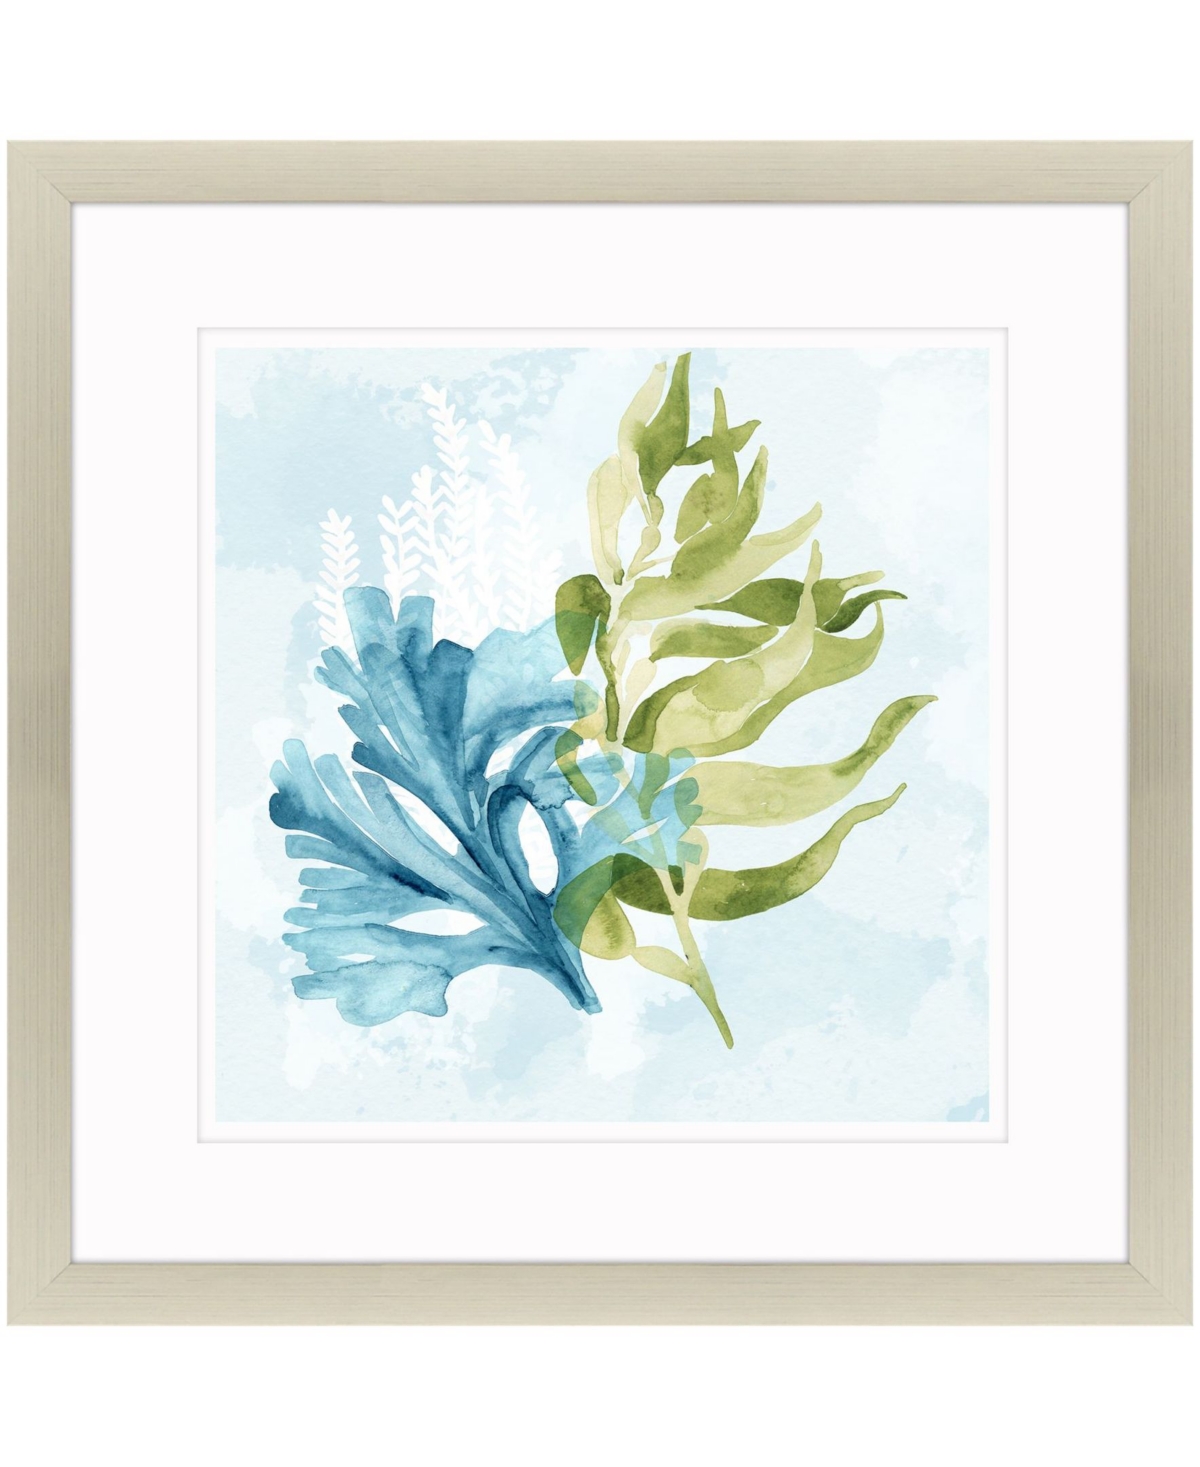 Paragon Picture Gallery Under Sea Ii Framed Art In Blue